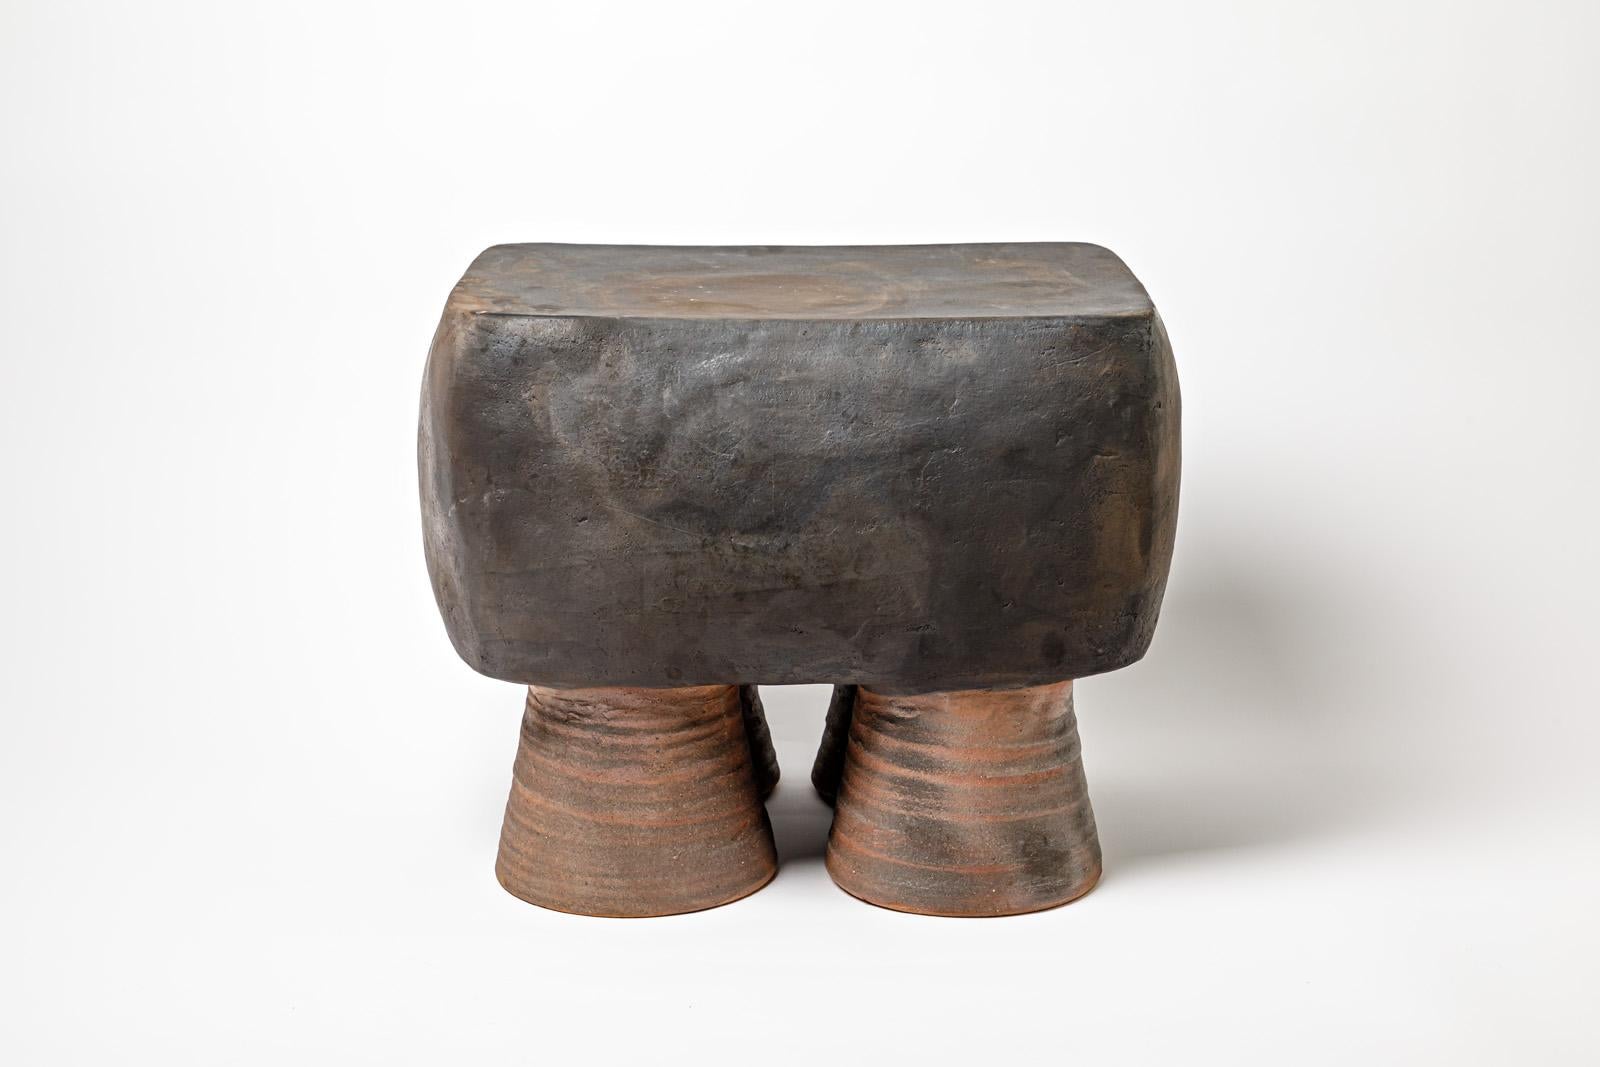 Black glazed ceramic stool or coffee table by Mia Jensen. 
Artist signature under the base. 2023.
H : 16.5’ x 14.2’ x 19.3’ inches.